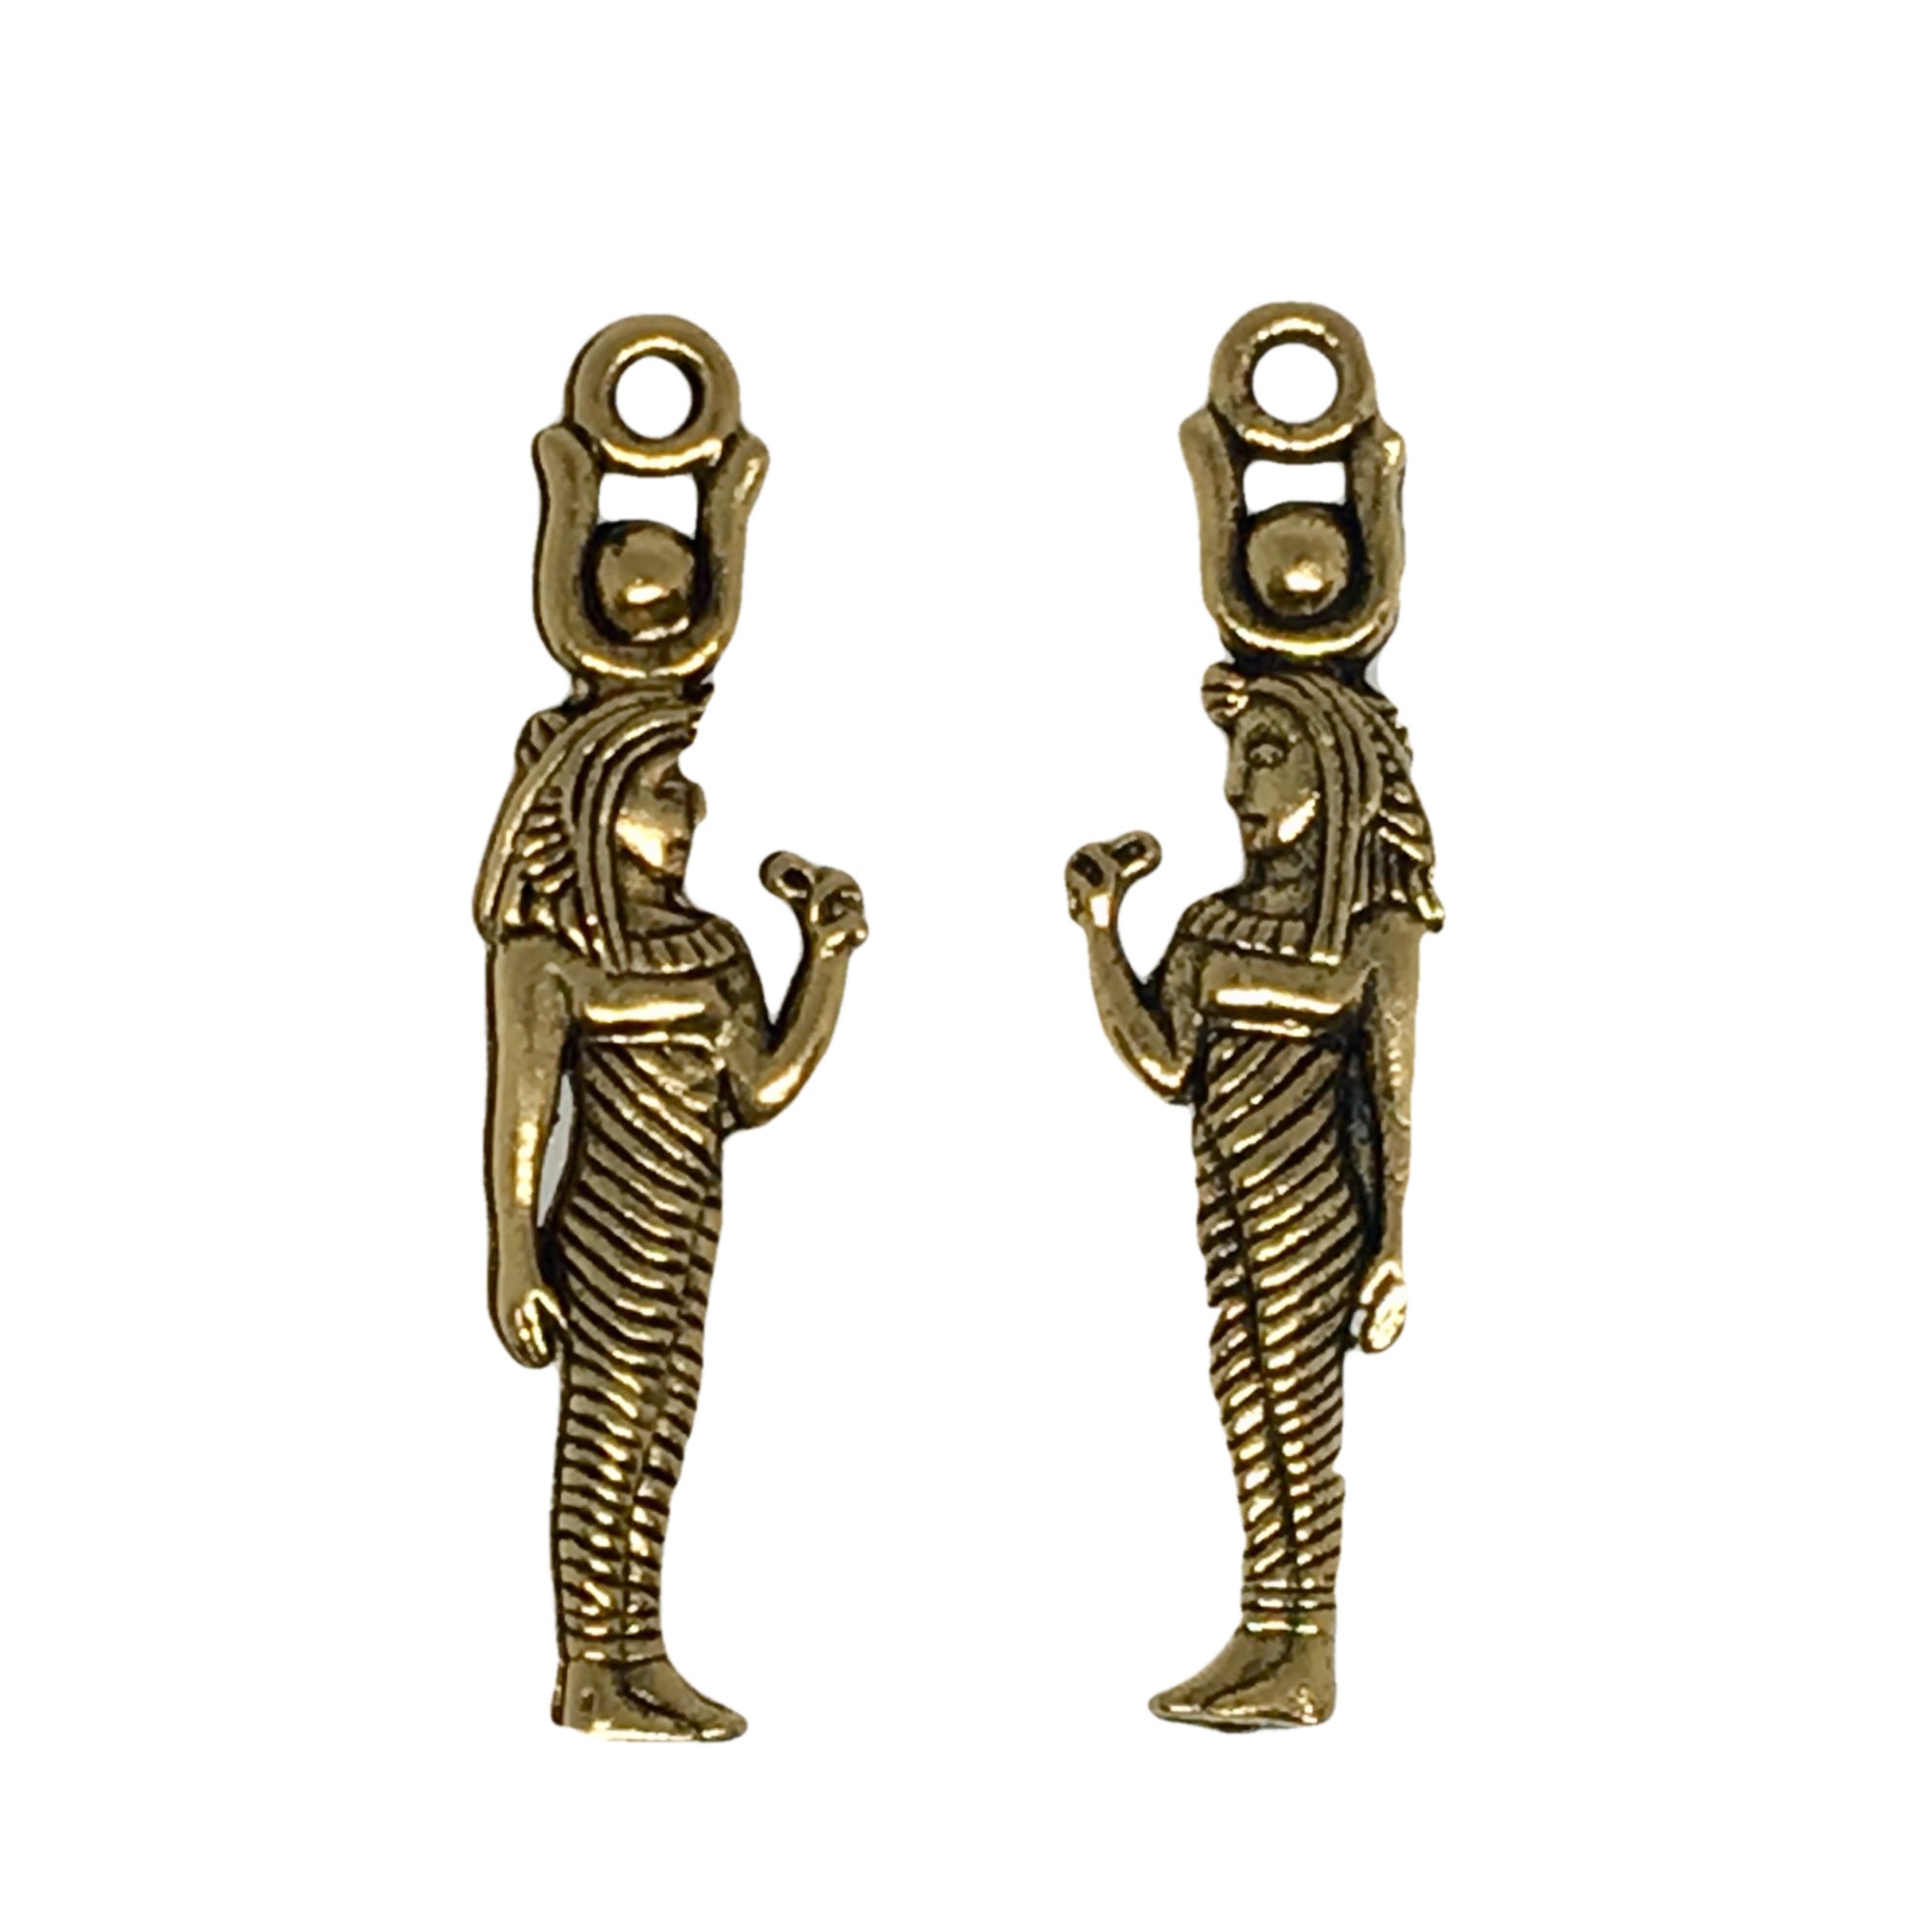 Standing Egyptian Goddess Charms - Qty of 5 - 24kt Gold Plated Lead Free Plated Pewter - American Made